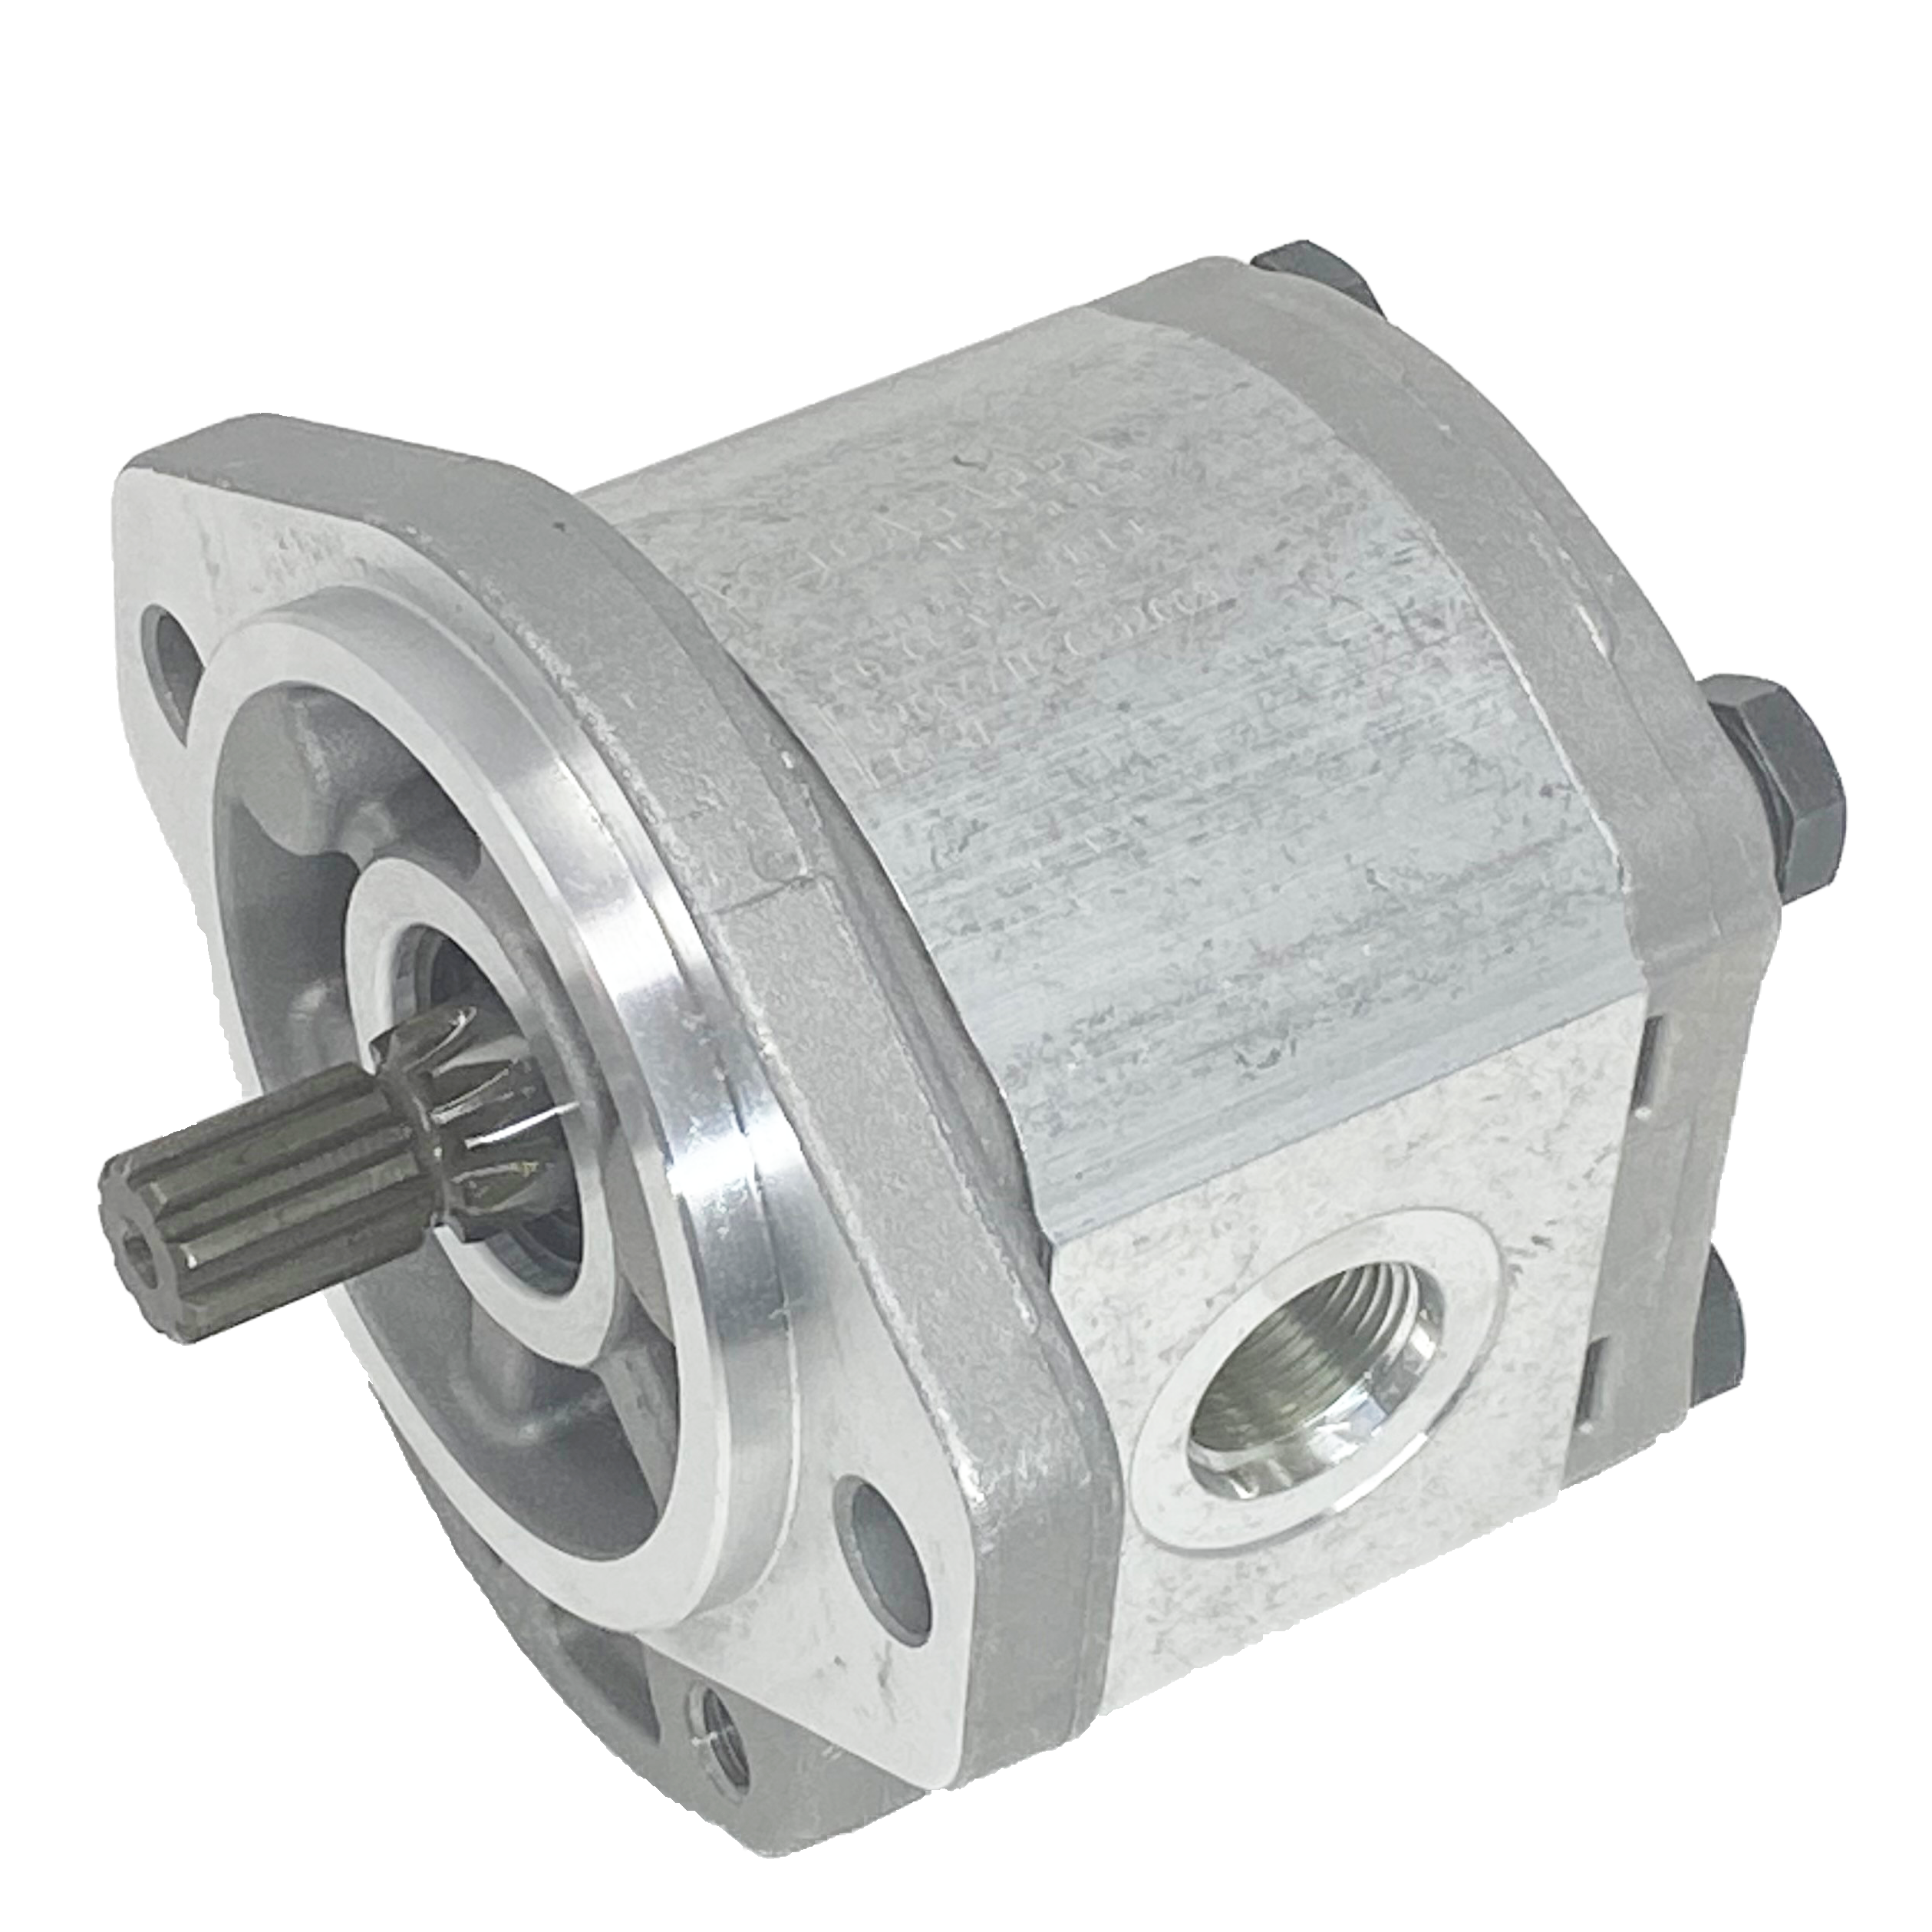 PLP20.4S0-49S1-LOF/OC-S7-N-EL-FS : Casappa Polaris Gear Pump, 4.95cc, 3625psi Rated, 4000RPM, CCW, 5/8" Keyed Shaft, SAE A 2-Bolt Flange, 1" #16 SAE Inlet, 0.625 (5/8") #10 SAE Outlet, Aluminum Body & Flange